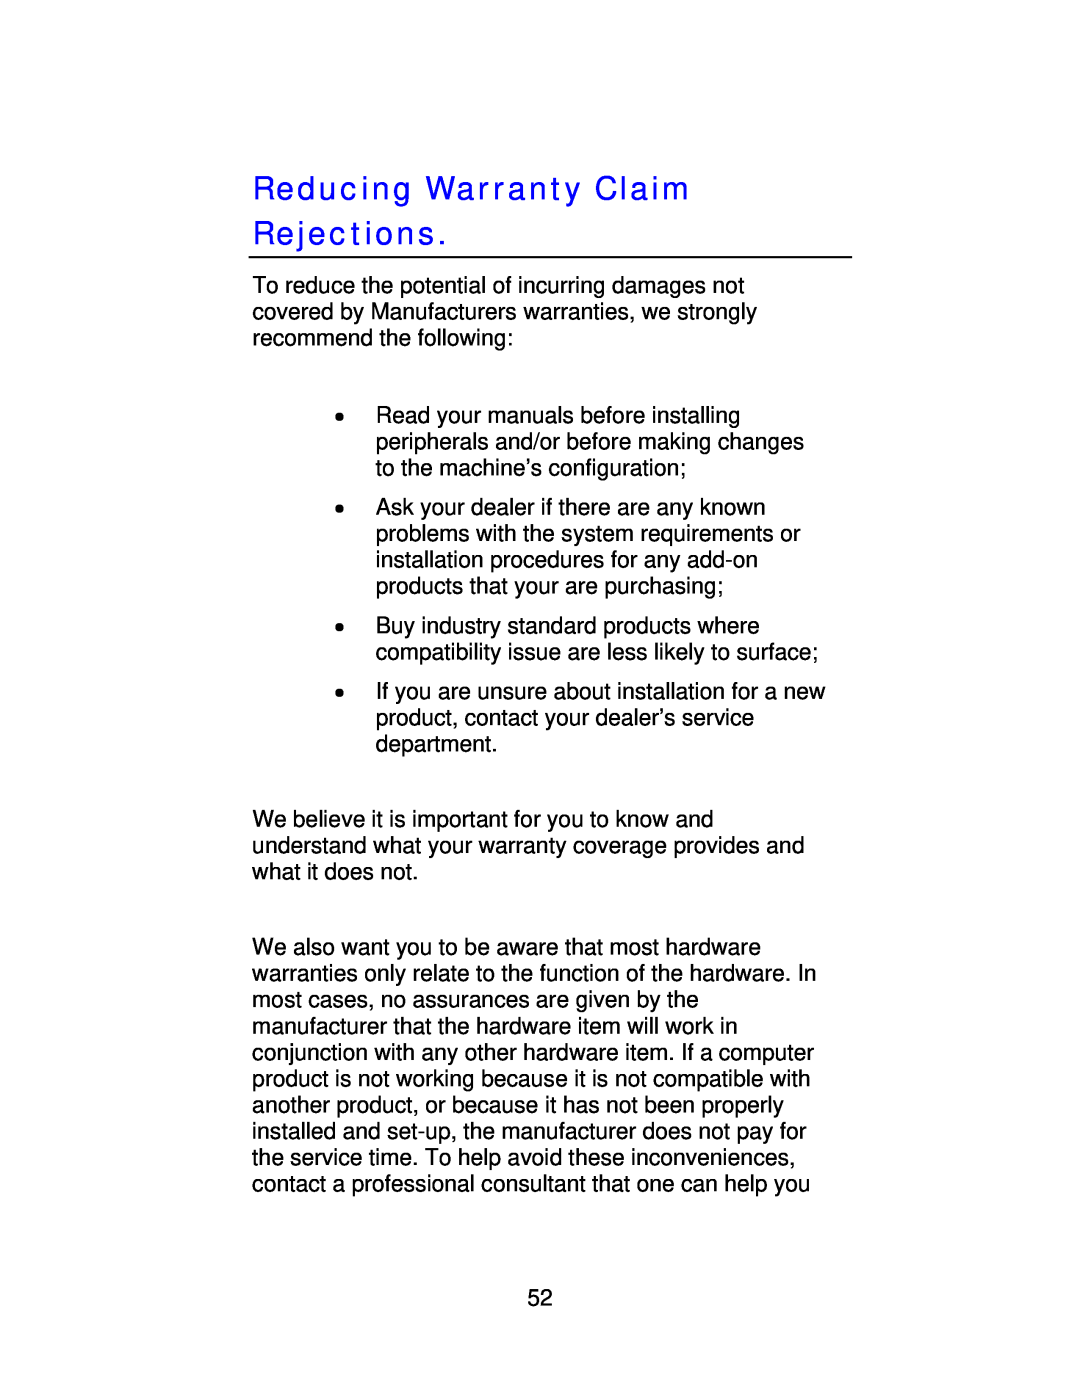 Jaton 5200 user manual Reducing Warranty Claim Rejections 